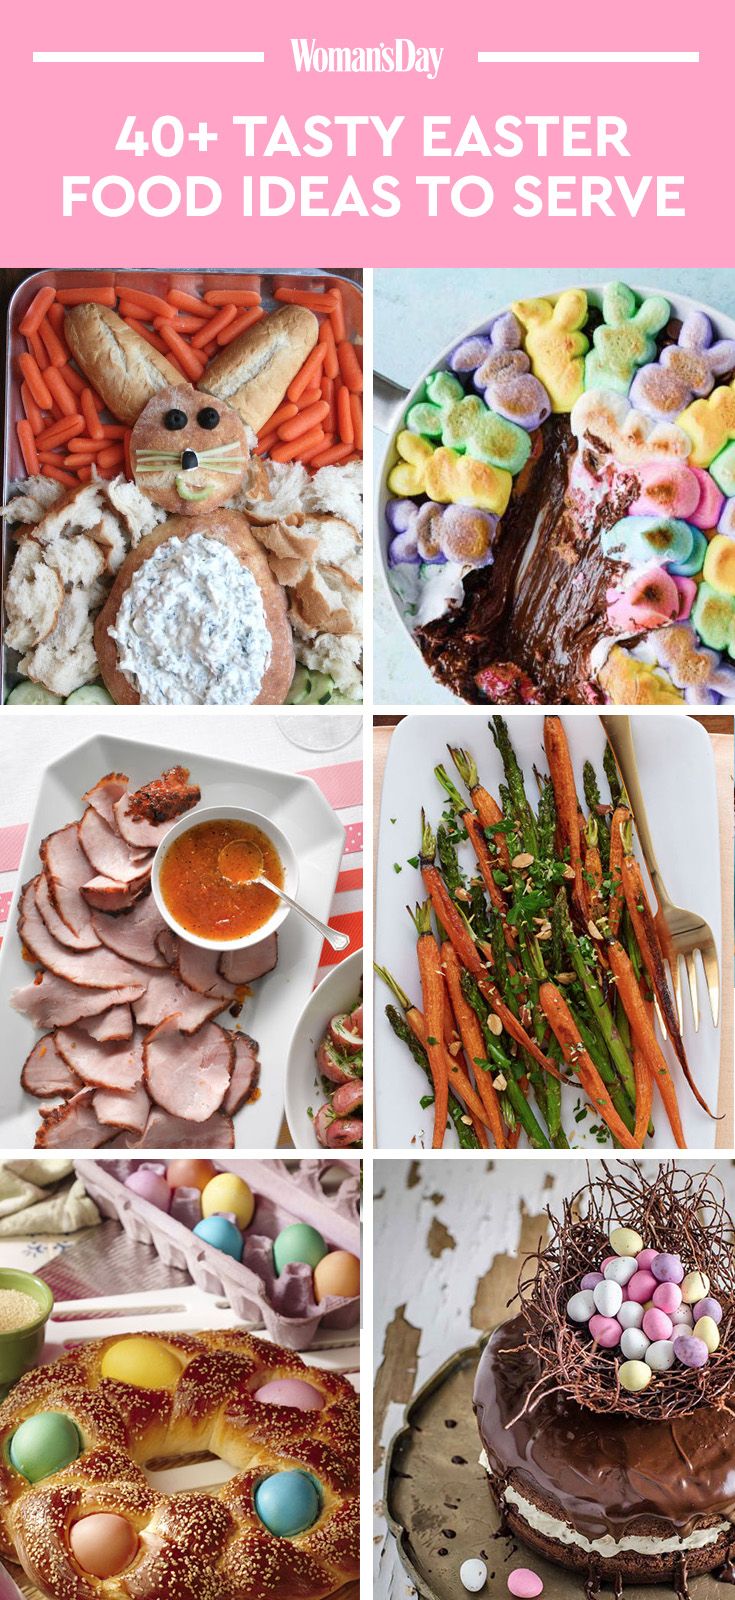 46 easy easter recipes - easter food ideas - womansday